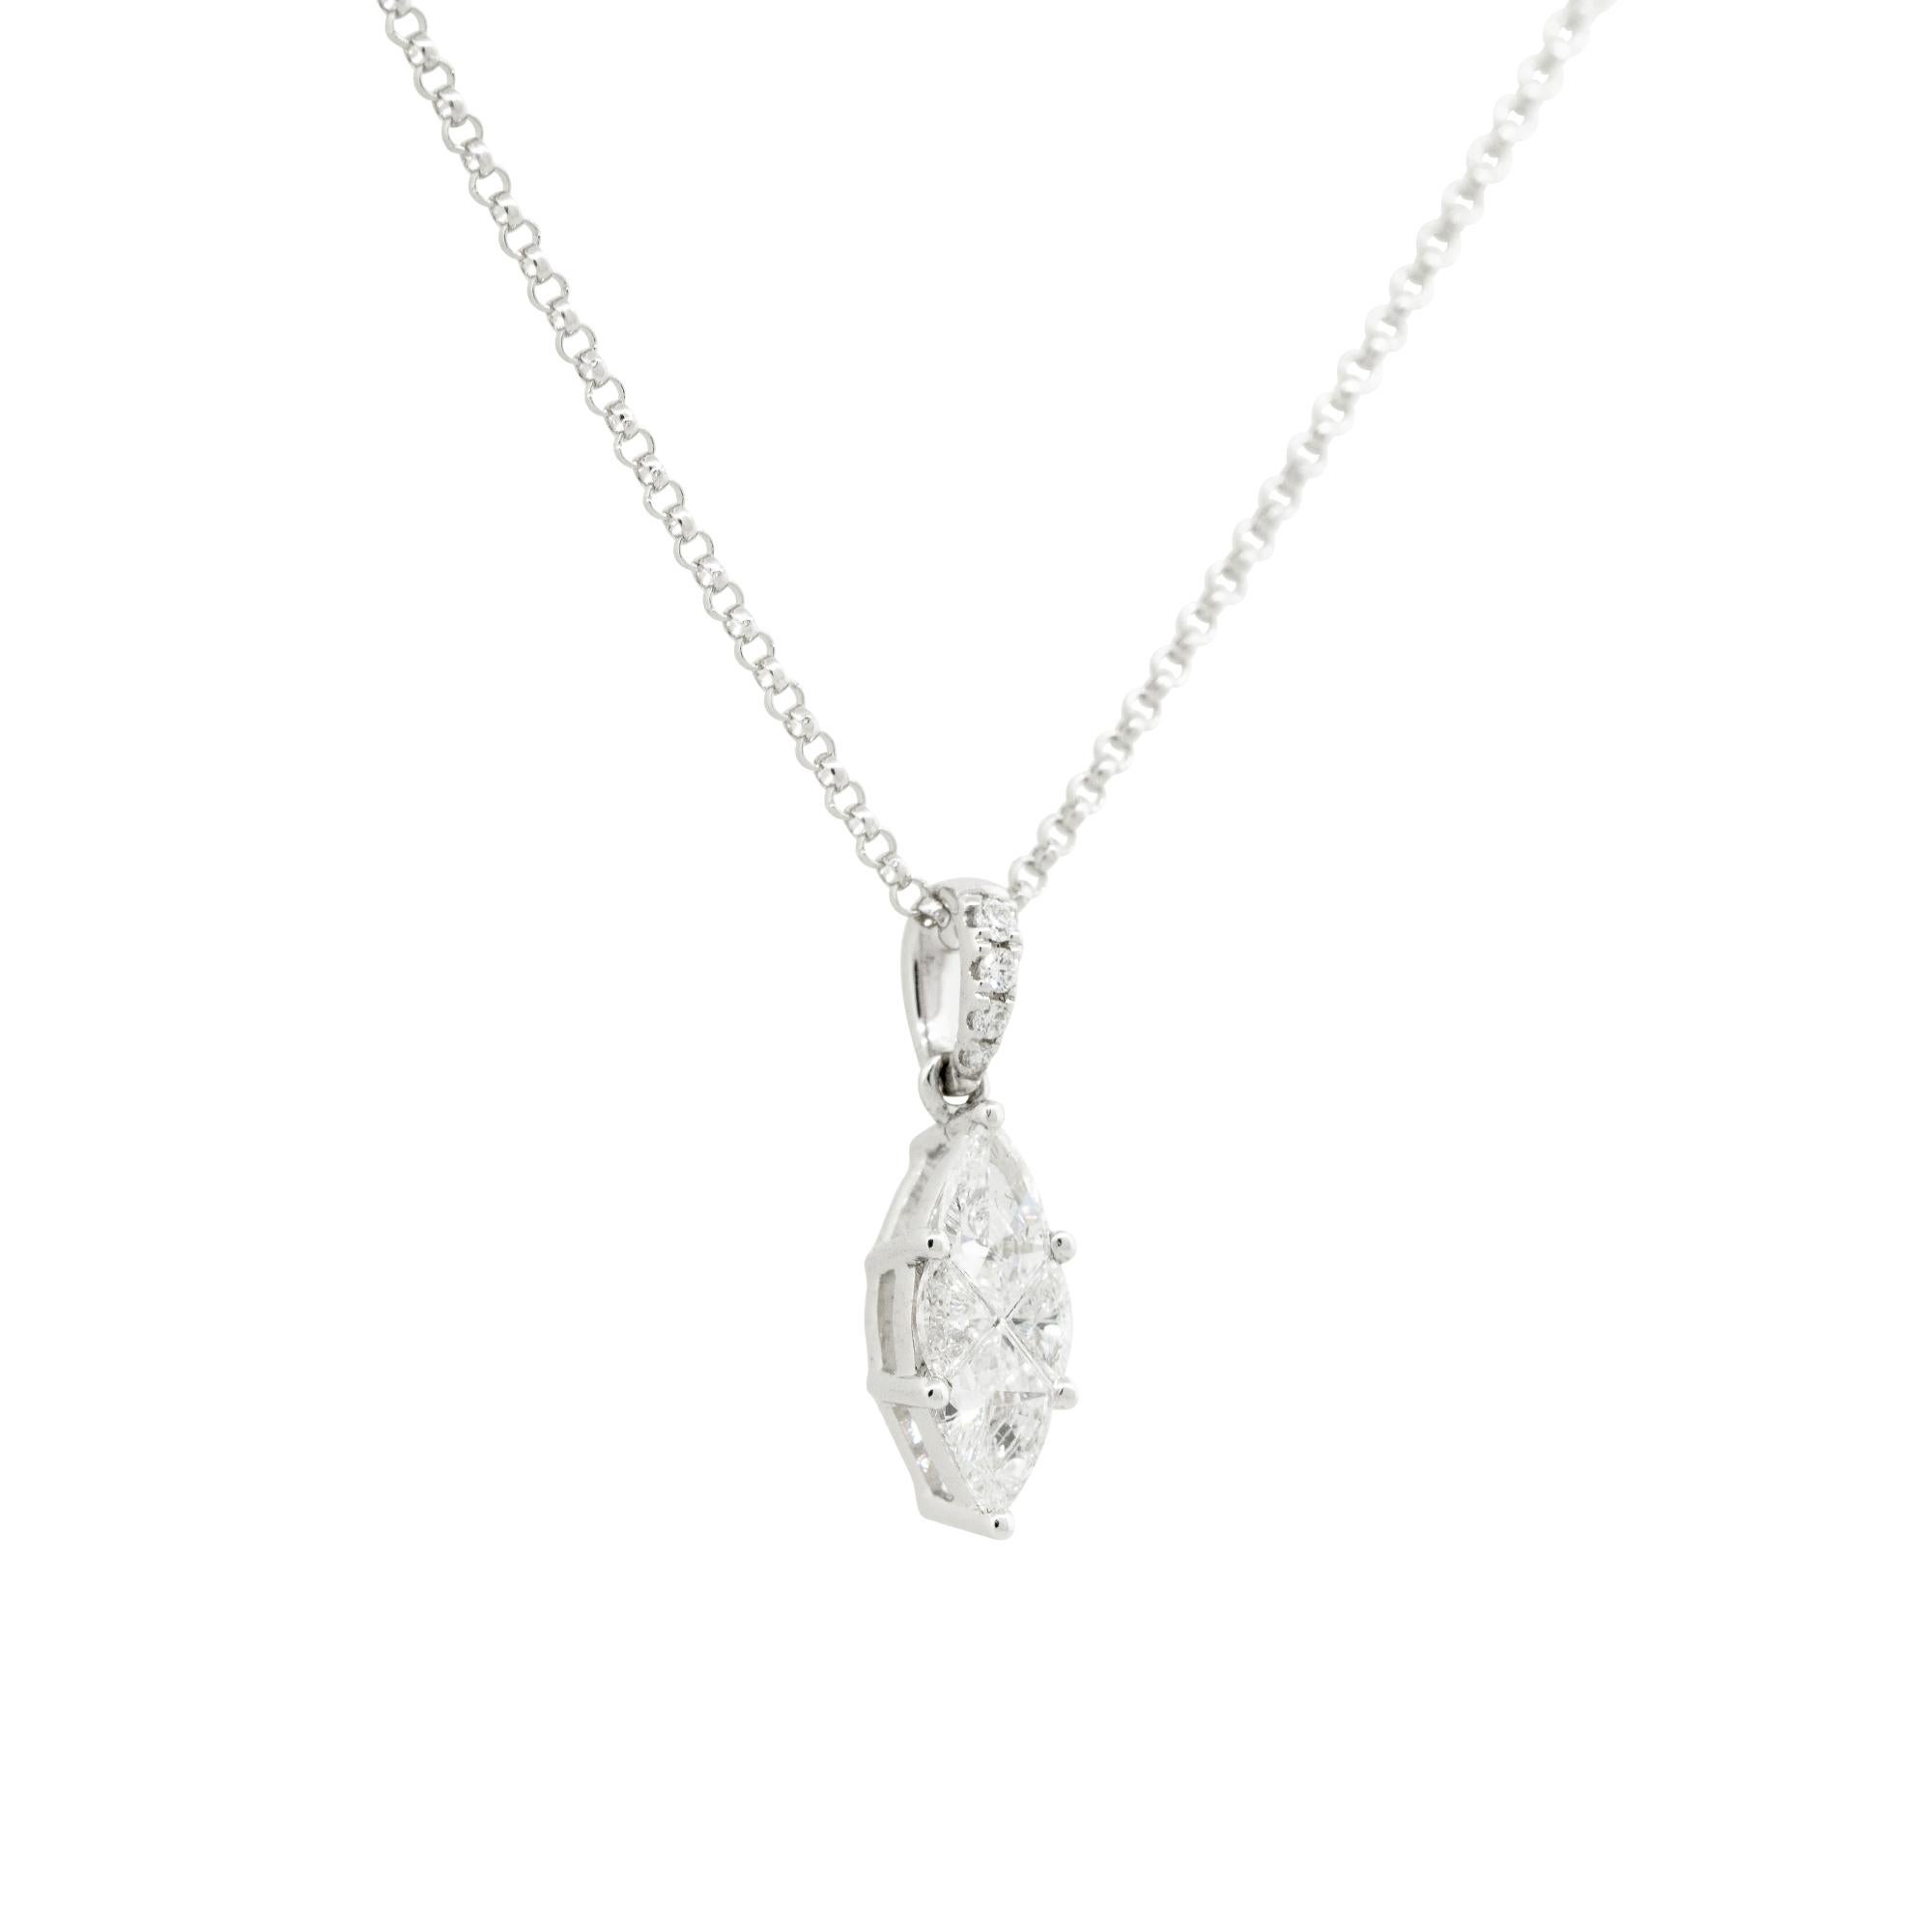 18k White Gold 0.71ctw Mosaic Marquise Cut Diamond Station Necklace
Material: 18k White Gold
Diamond Details: Approximately 0.71ctw of Marquise cut and Round Brilliant Diamonds. There are 
Necklace Length: Adjustable from 17-18